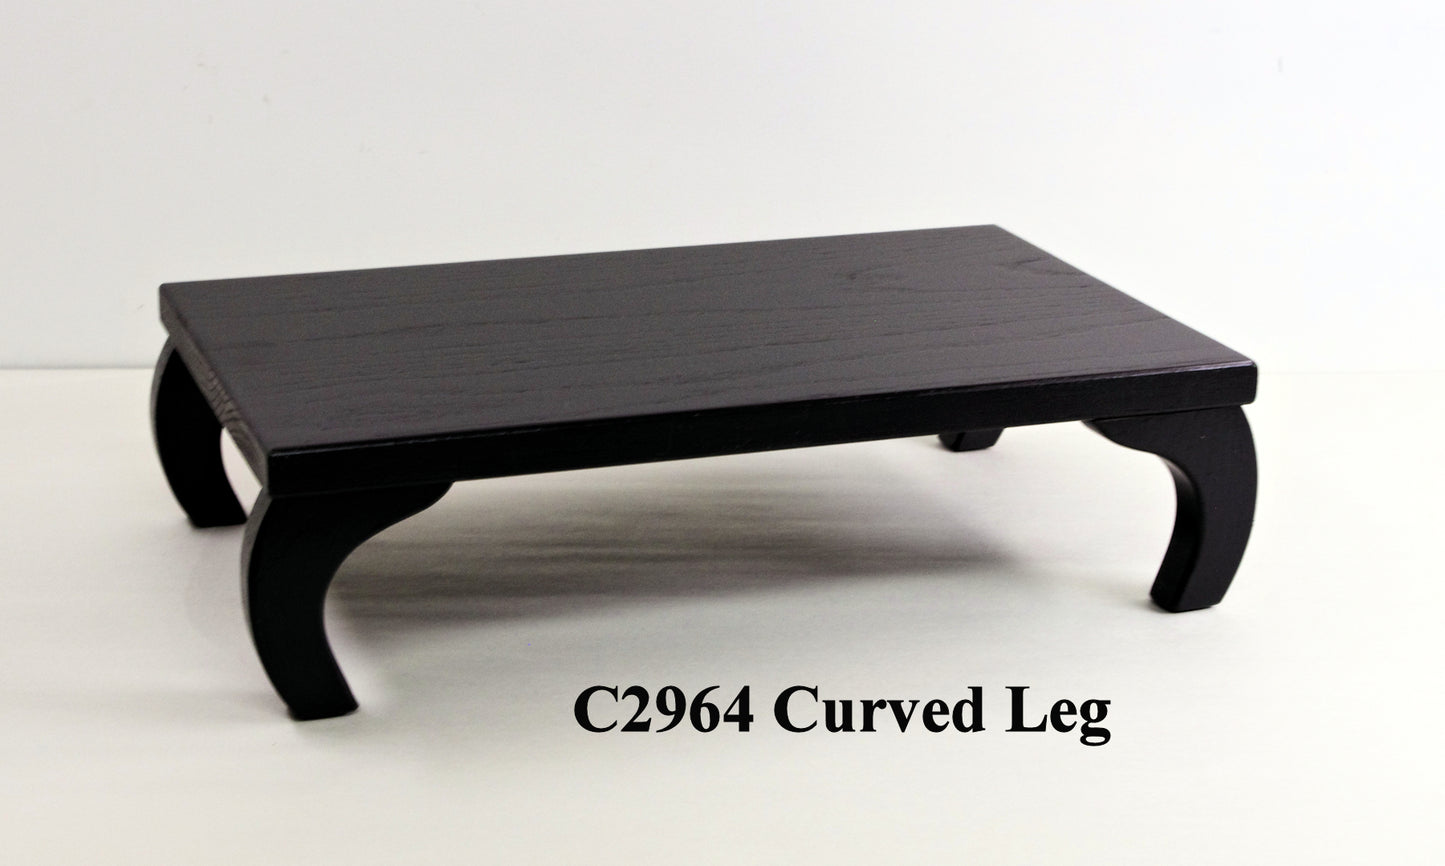 Bonsai Stand Curved Leg C2964 Made to Order 34" Length